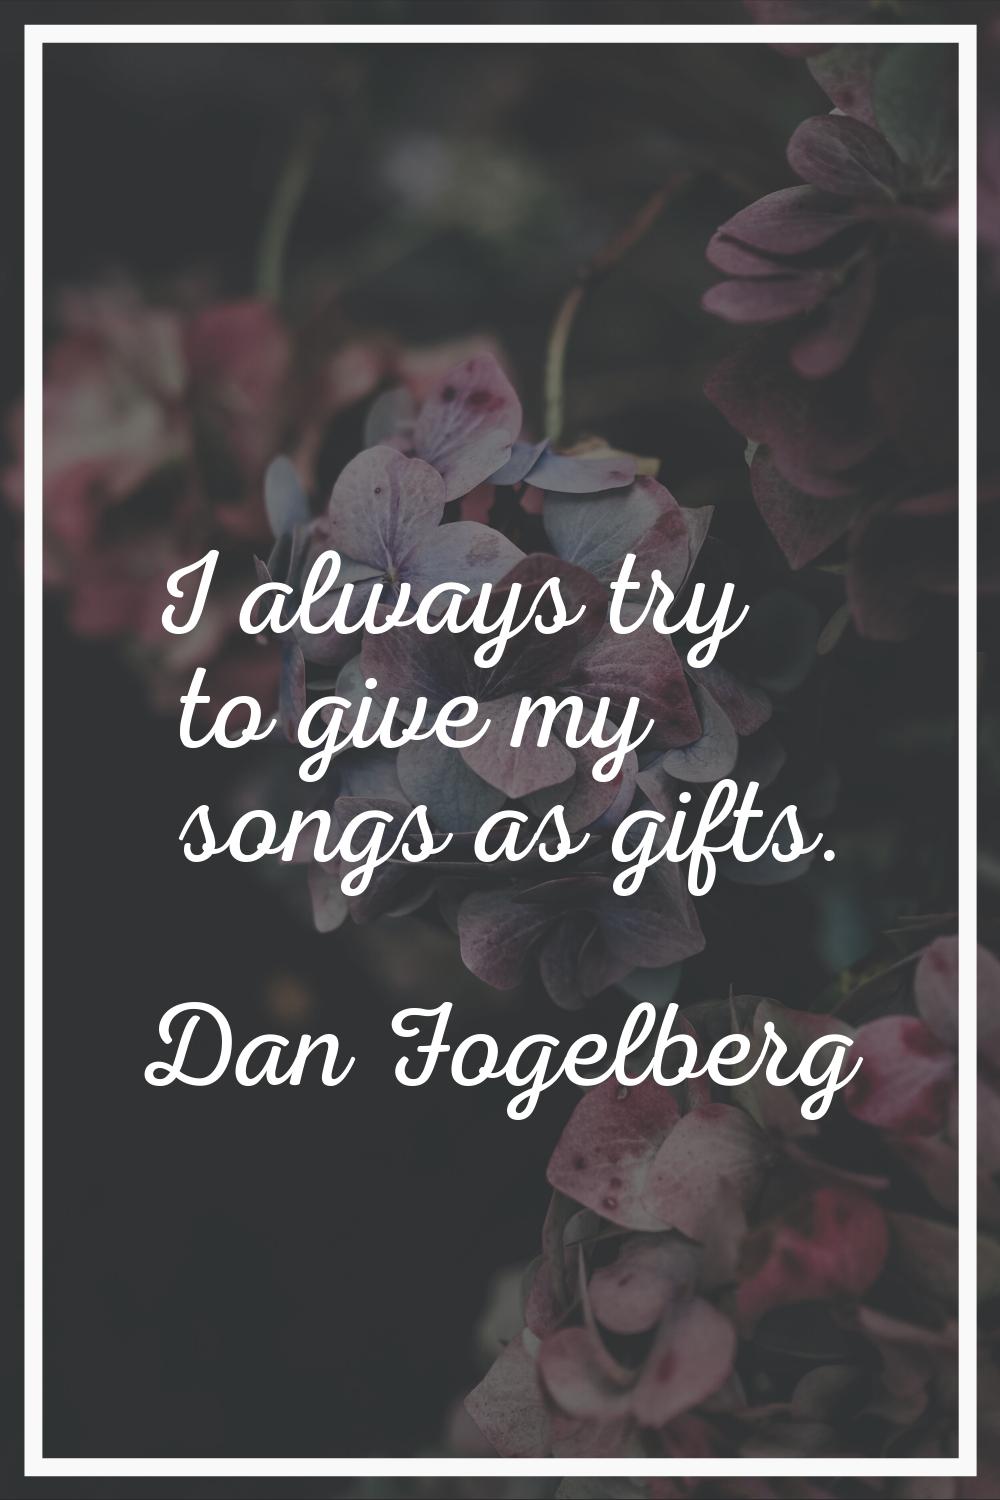 I always try to give my songs as gifts.